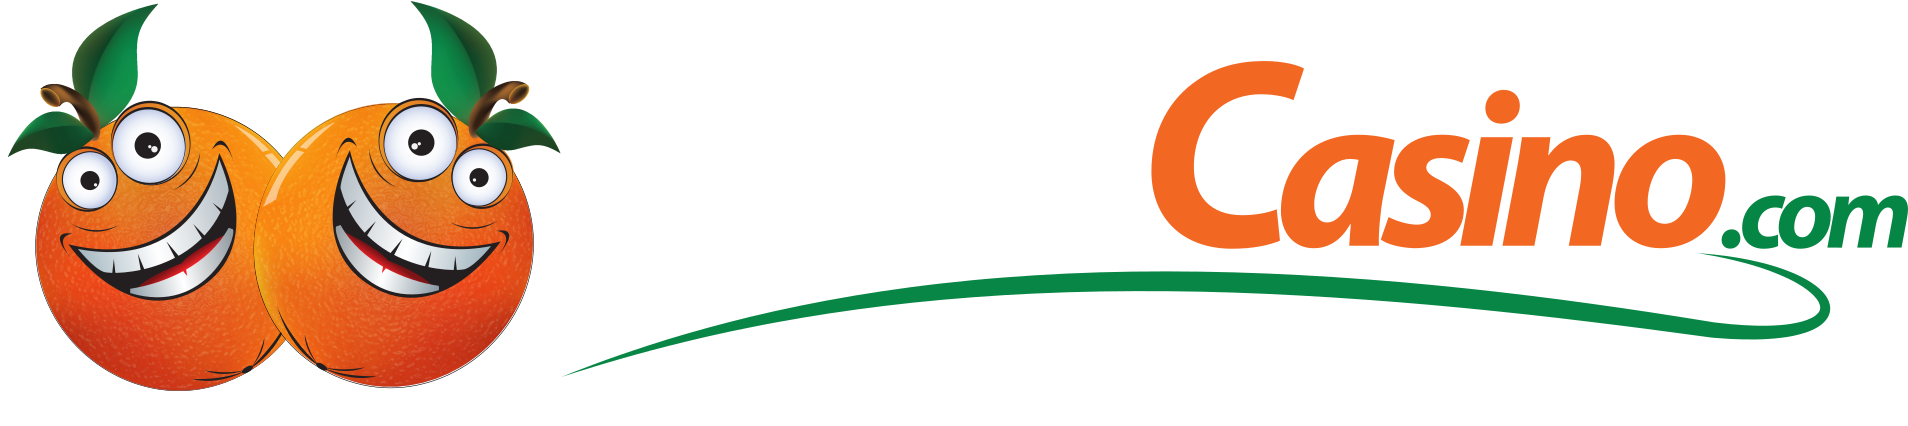 Casino as One of the Best Online Casino for Live Games